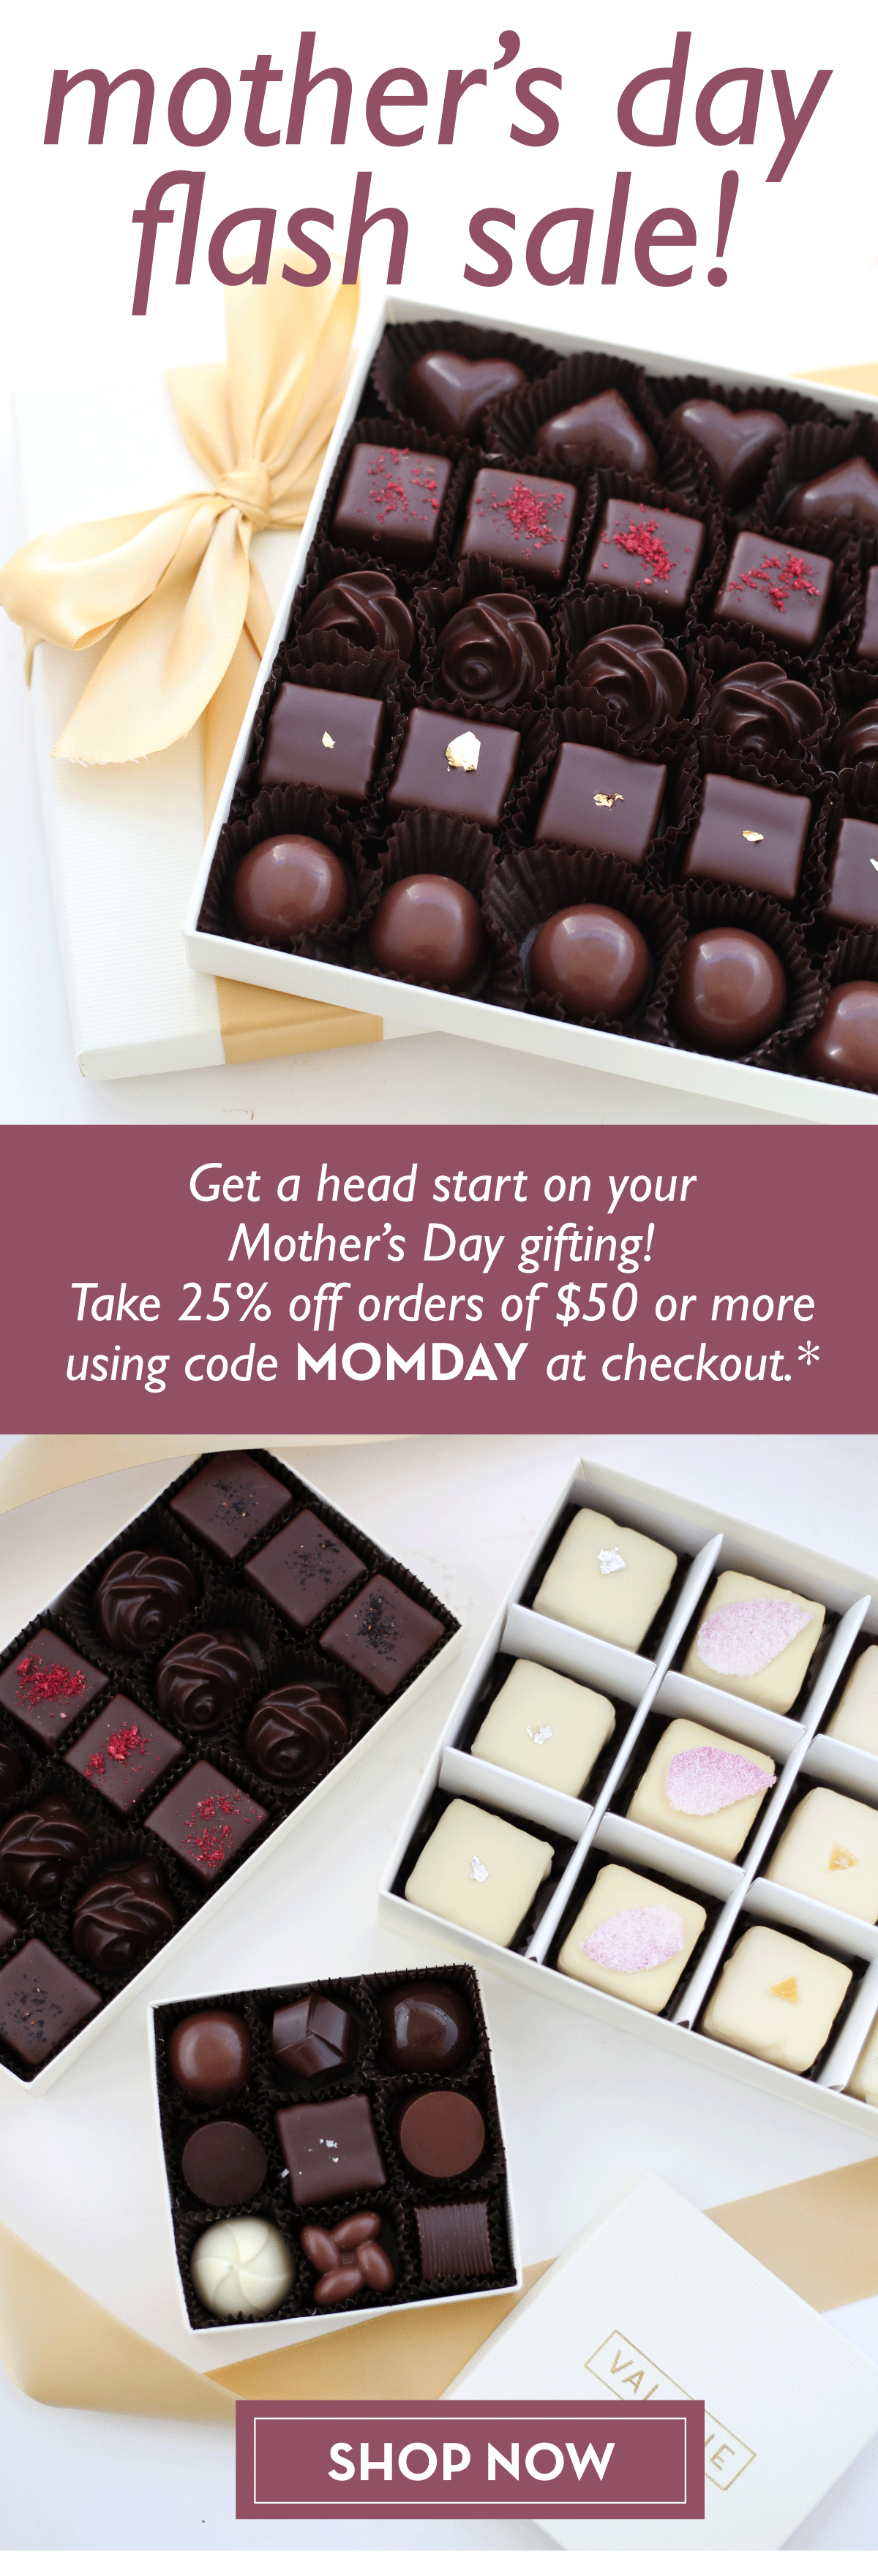 Get a head start on your Mother's Day gifting! Take 25% off orders of $50 or more using code MOMDAY at checkout.*